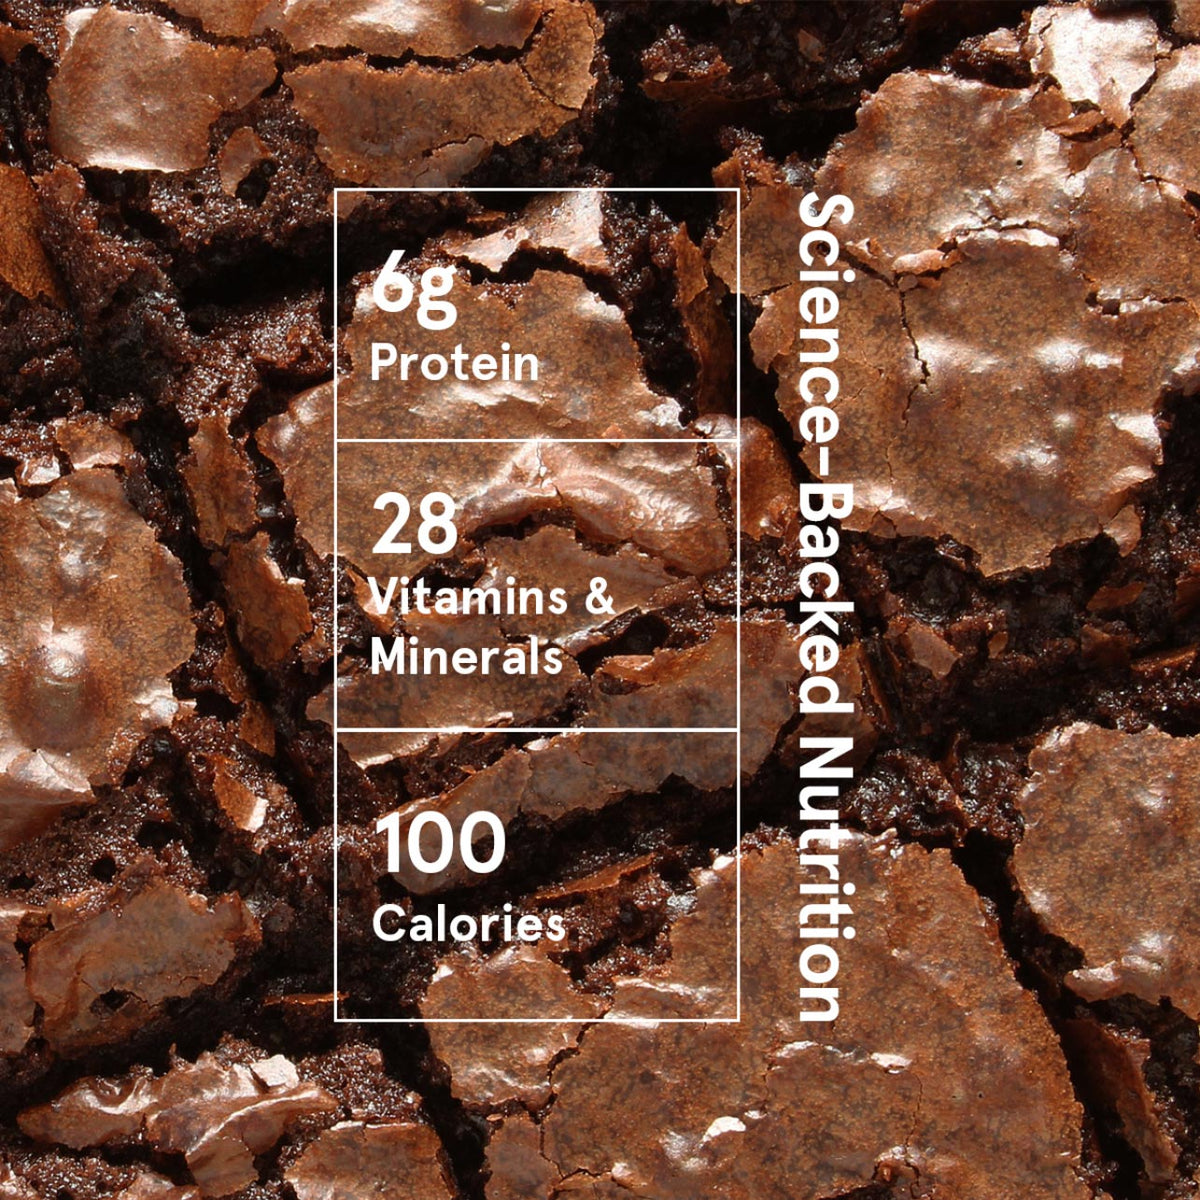 Soylent complete snack - chocolate brownie